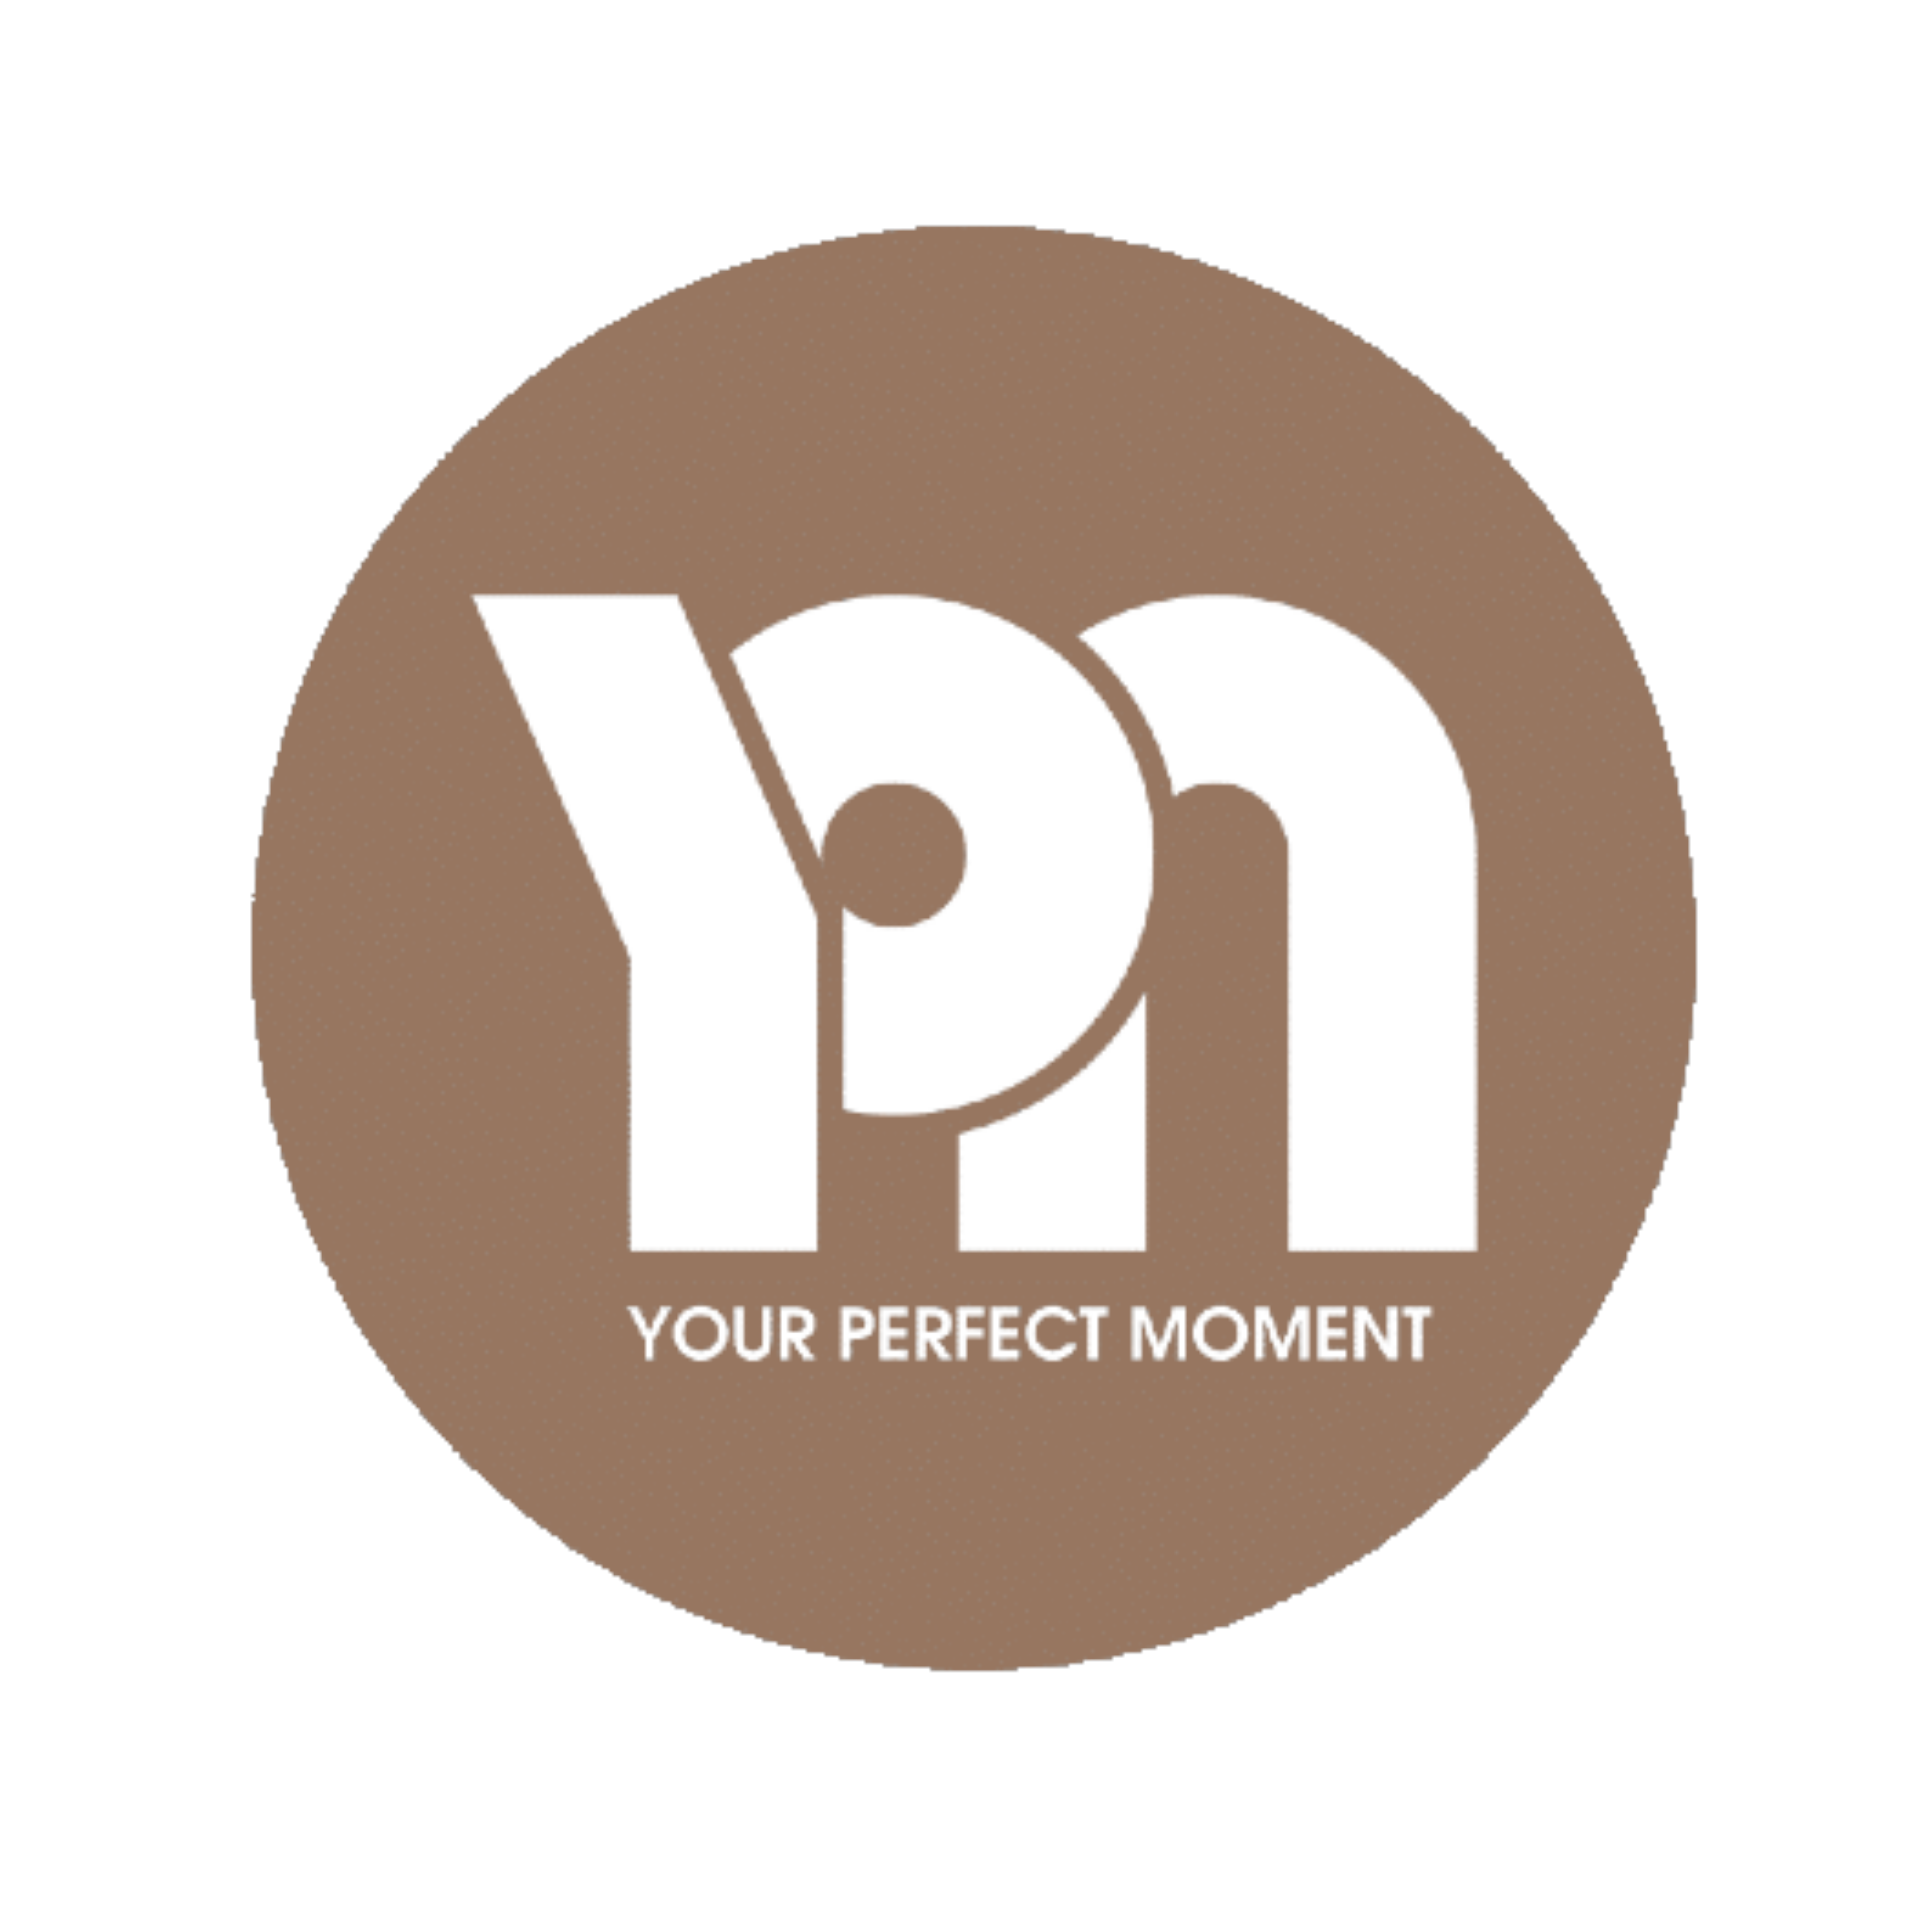 Your Perfect Moment